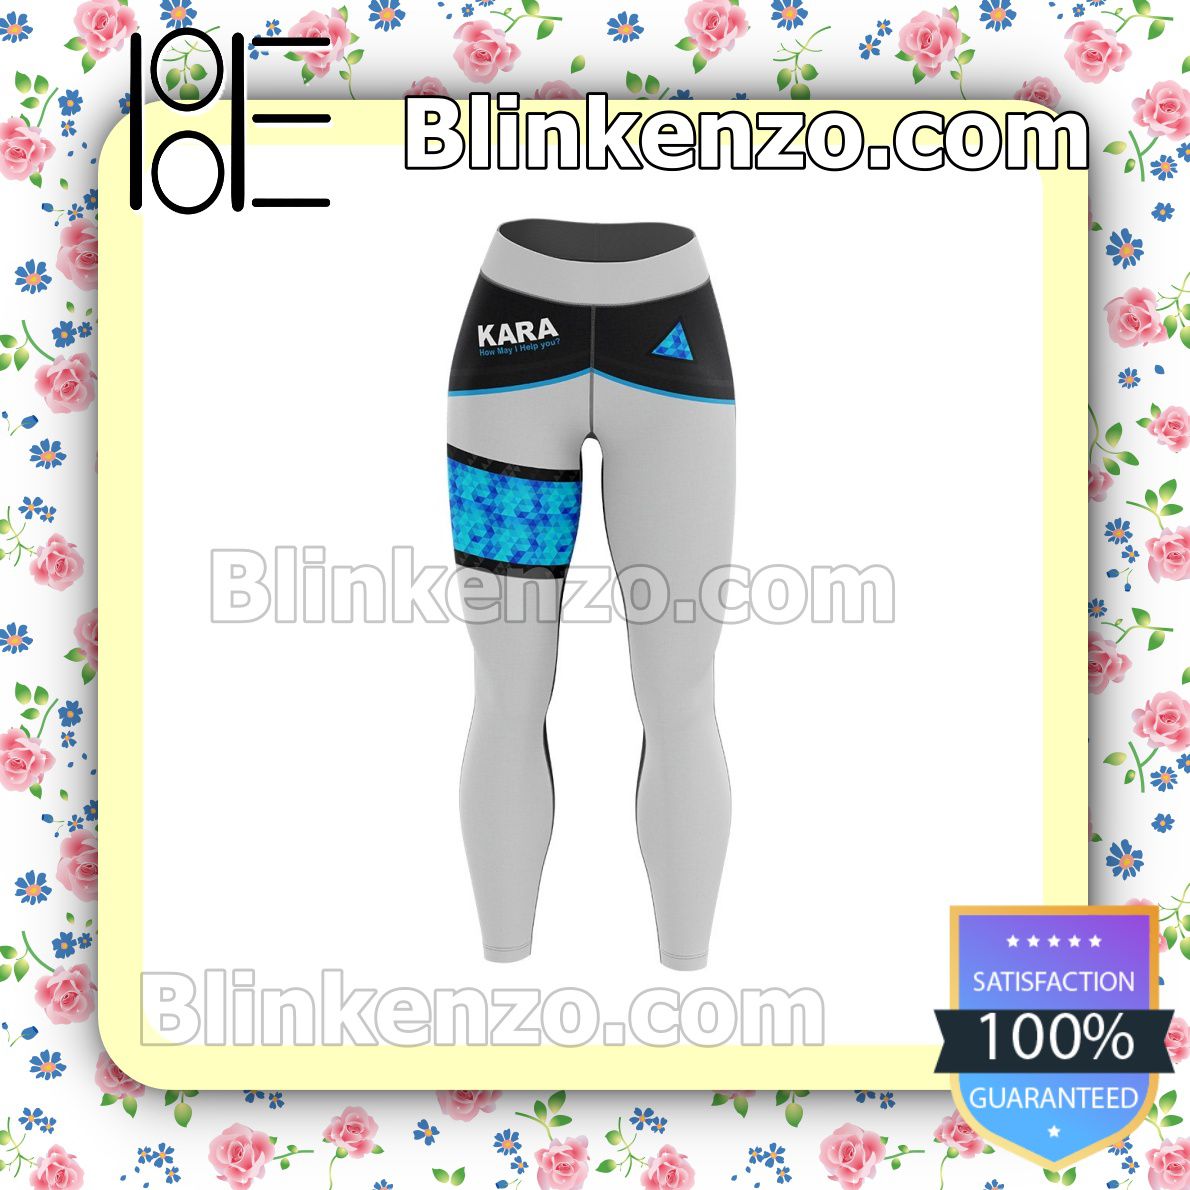 Best Detroit Android AX-400 Workout Leggings